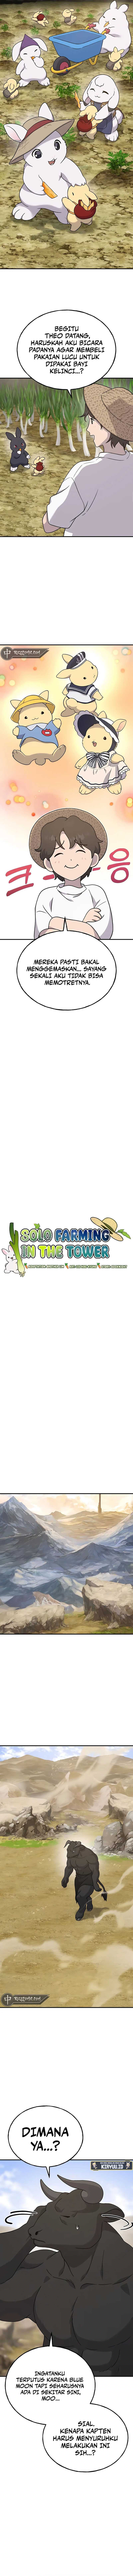 Solo Farming In The Tower Chapter 34